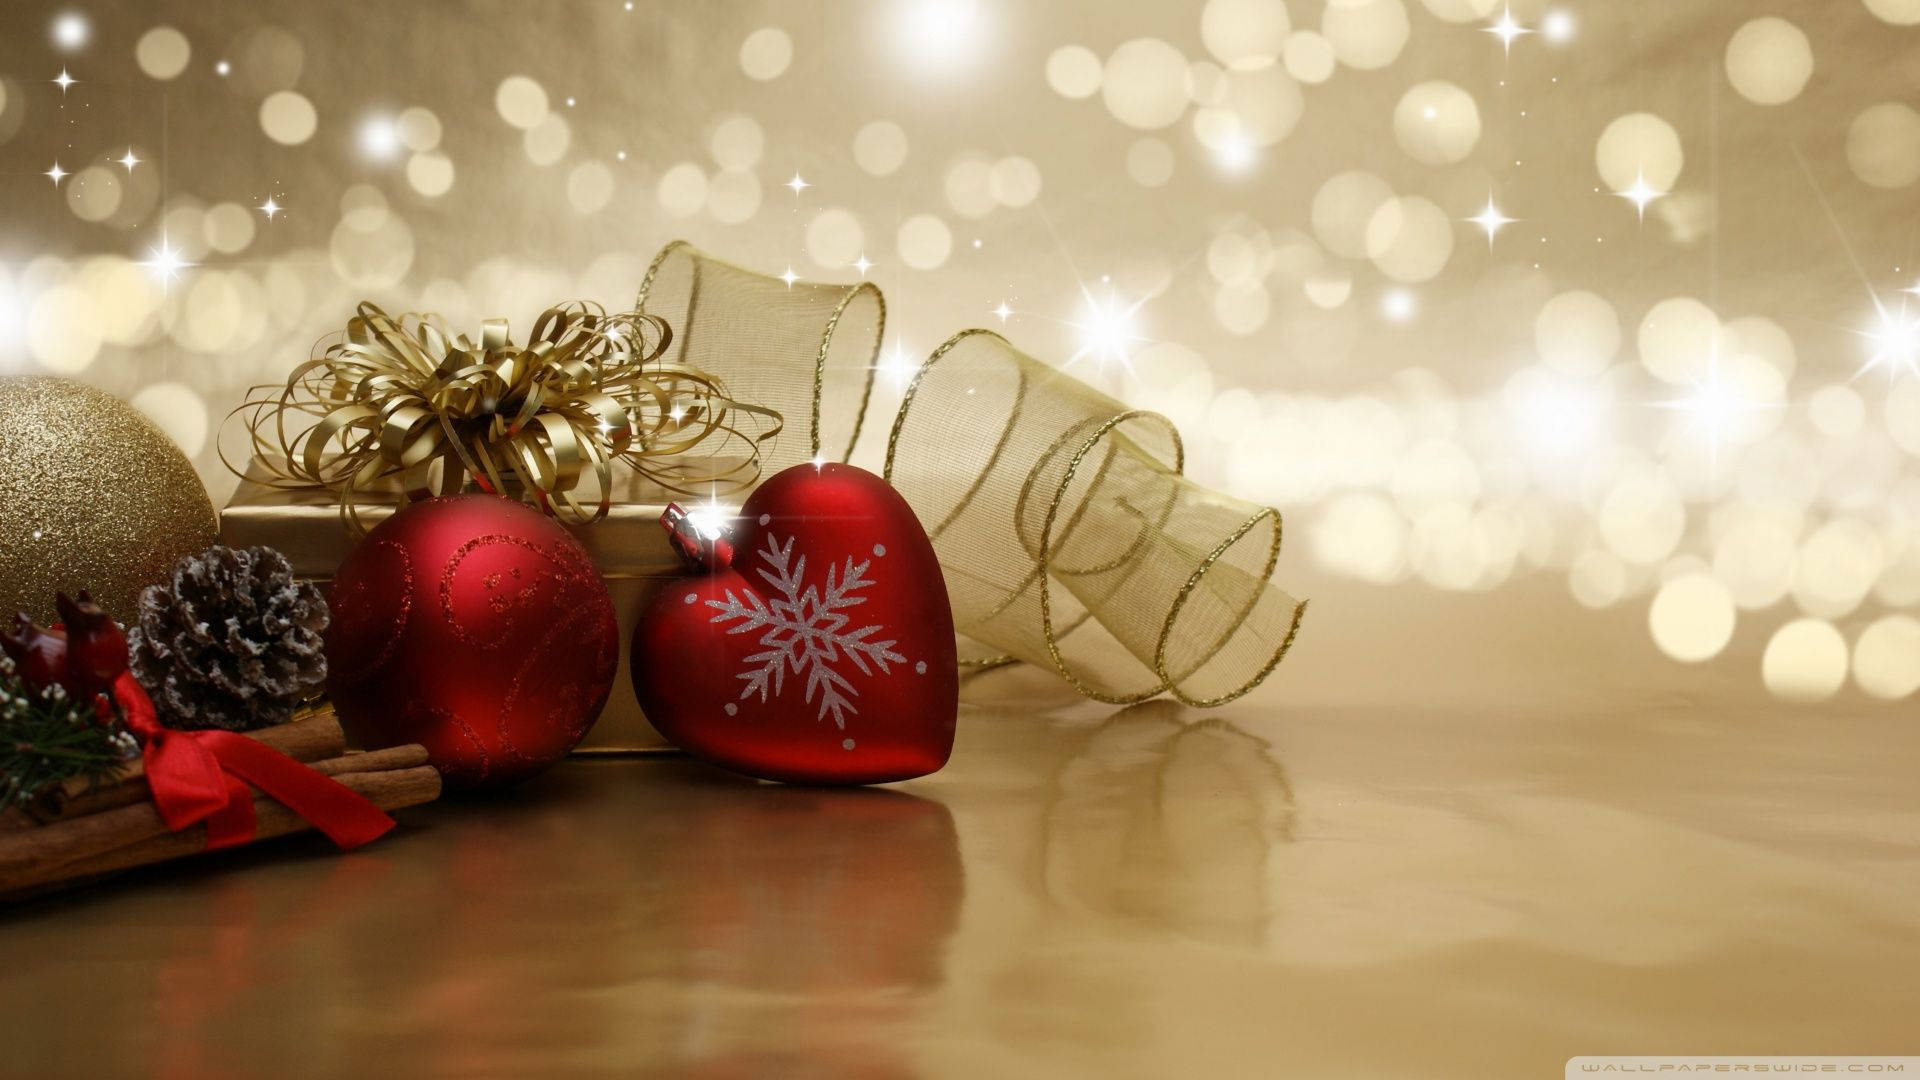 13451827 Christmas Background Images Stock Photos  Vectors   Shutterstock